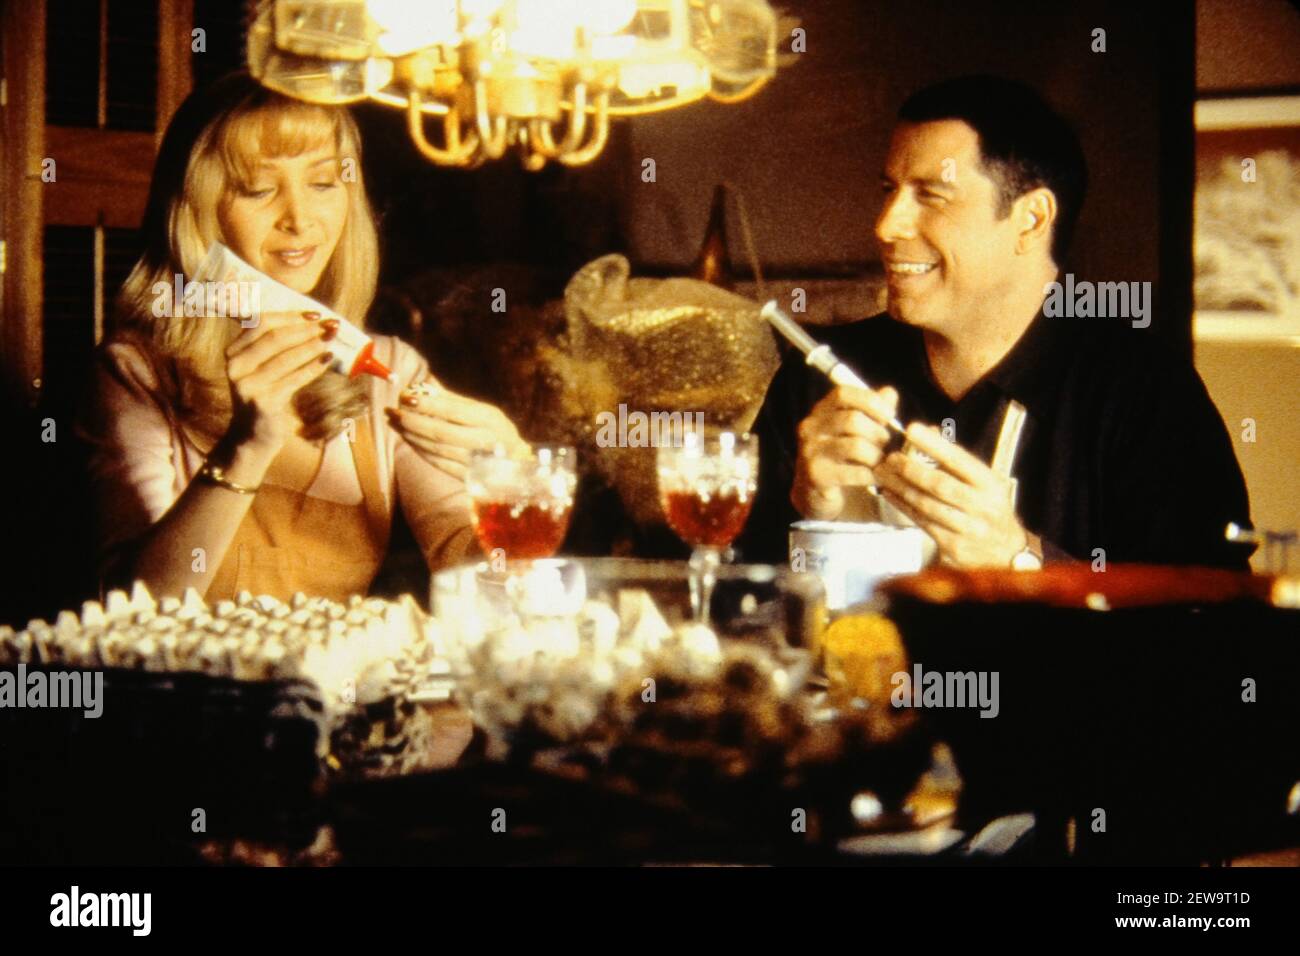 John Travolta, Lisa Kudrow, "Lucky Numbers" (2000) Paramount Pictures .  Photo Credit: Richard Foreman/Paramount Pictures /The Hollywood Archive -  File Reference # 34082-735THA Stock Photo - Alamy